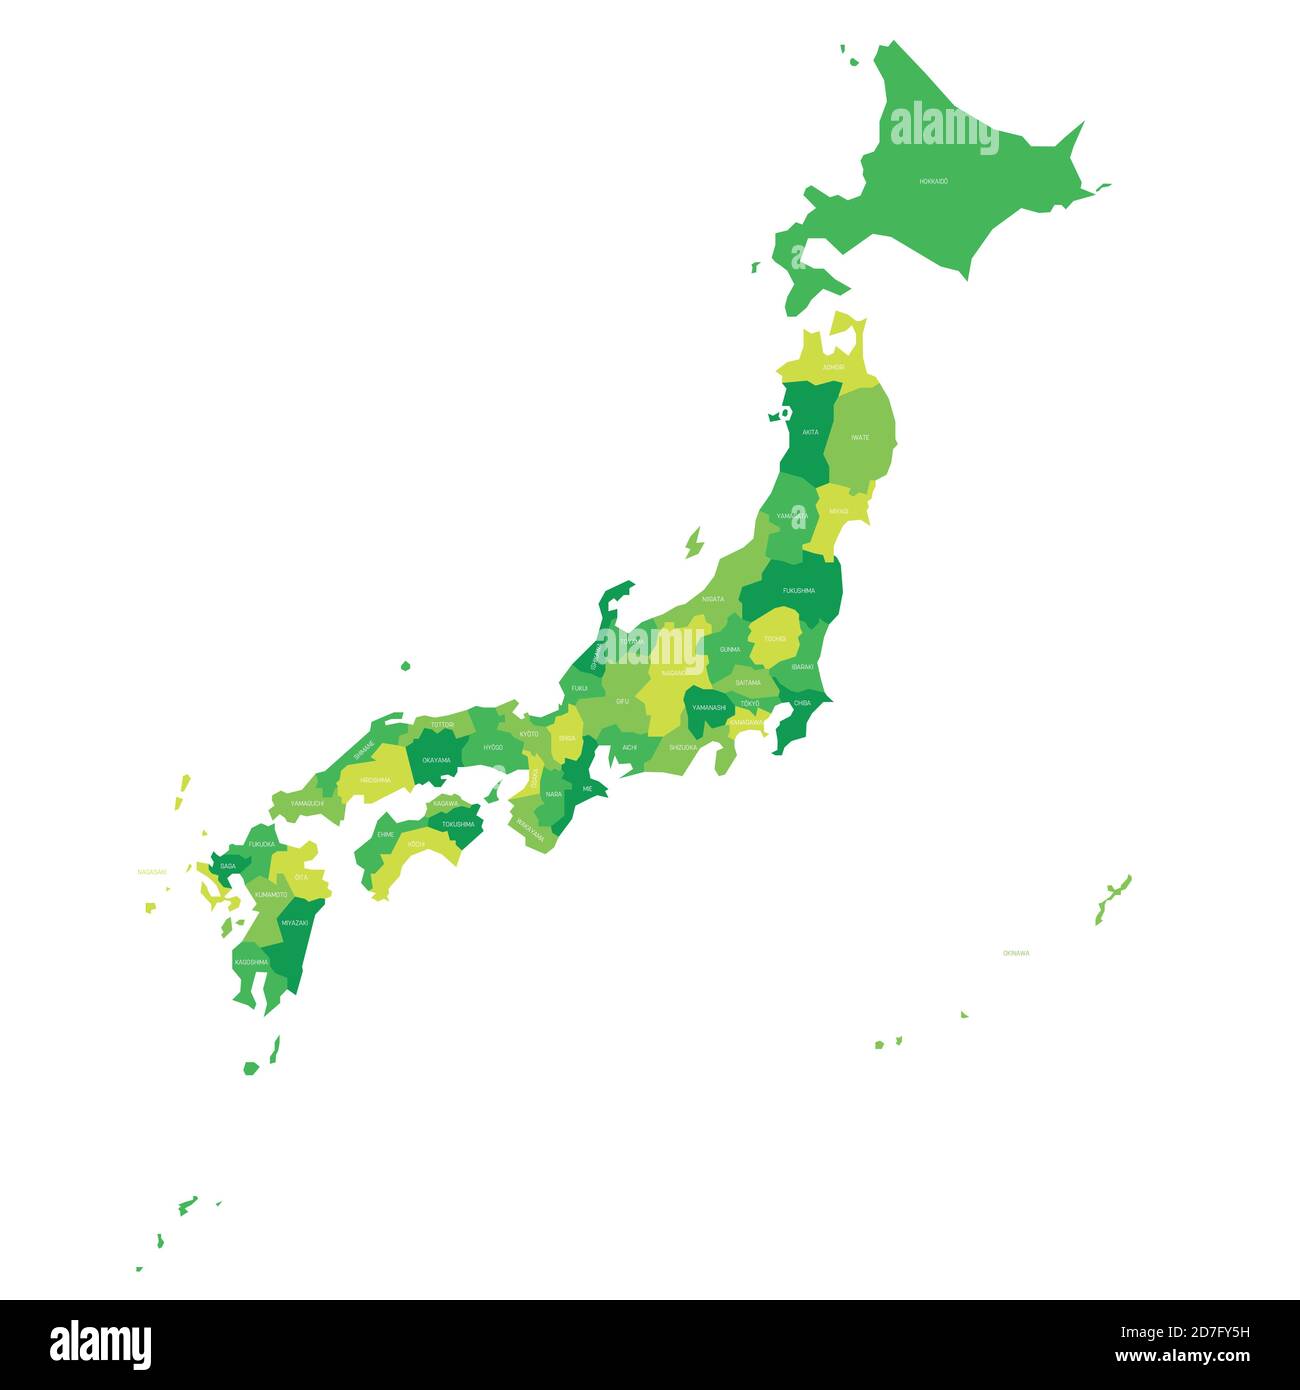 Green political map of Japan. Administrative divisions - prefectures. Simple flat vector map with labels. Stock Vector